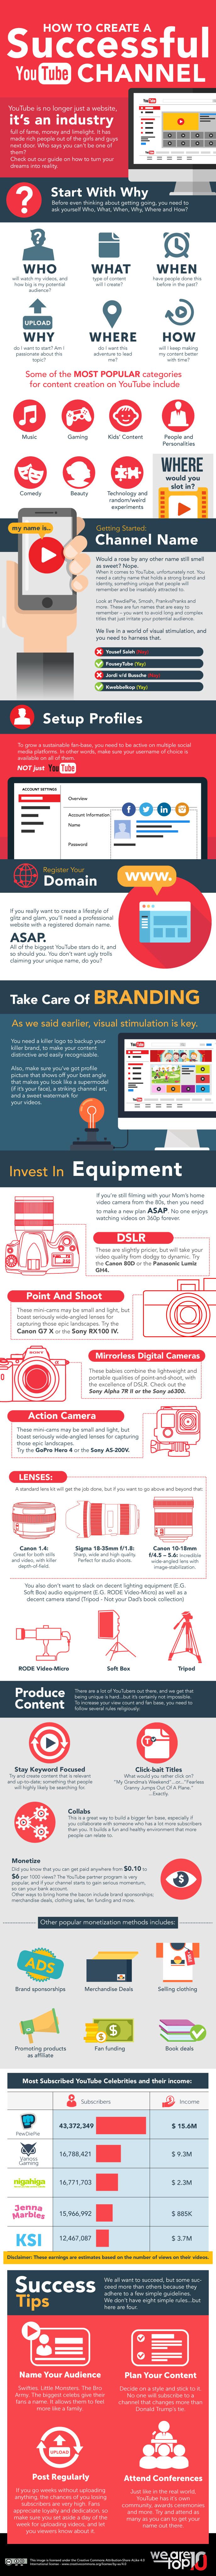 How To Create A Successful Youtube Channel Infographic - Venngage Infographic Examples